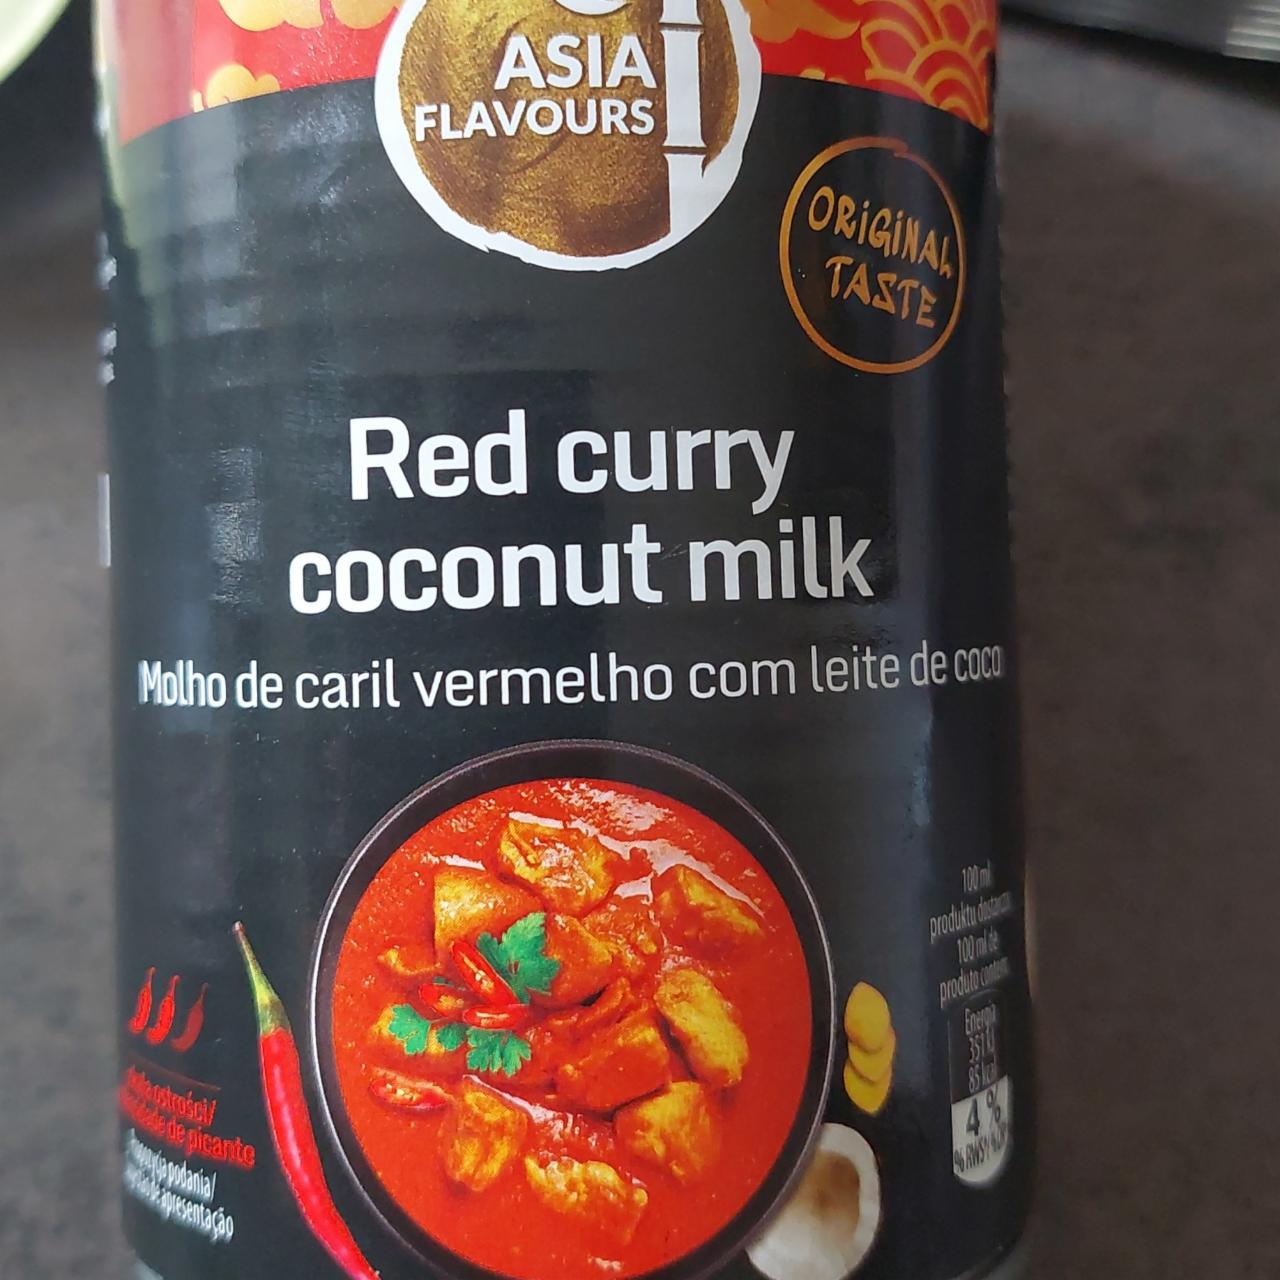 Fotografie - Red curry coconut milk Asia Flavours